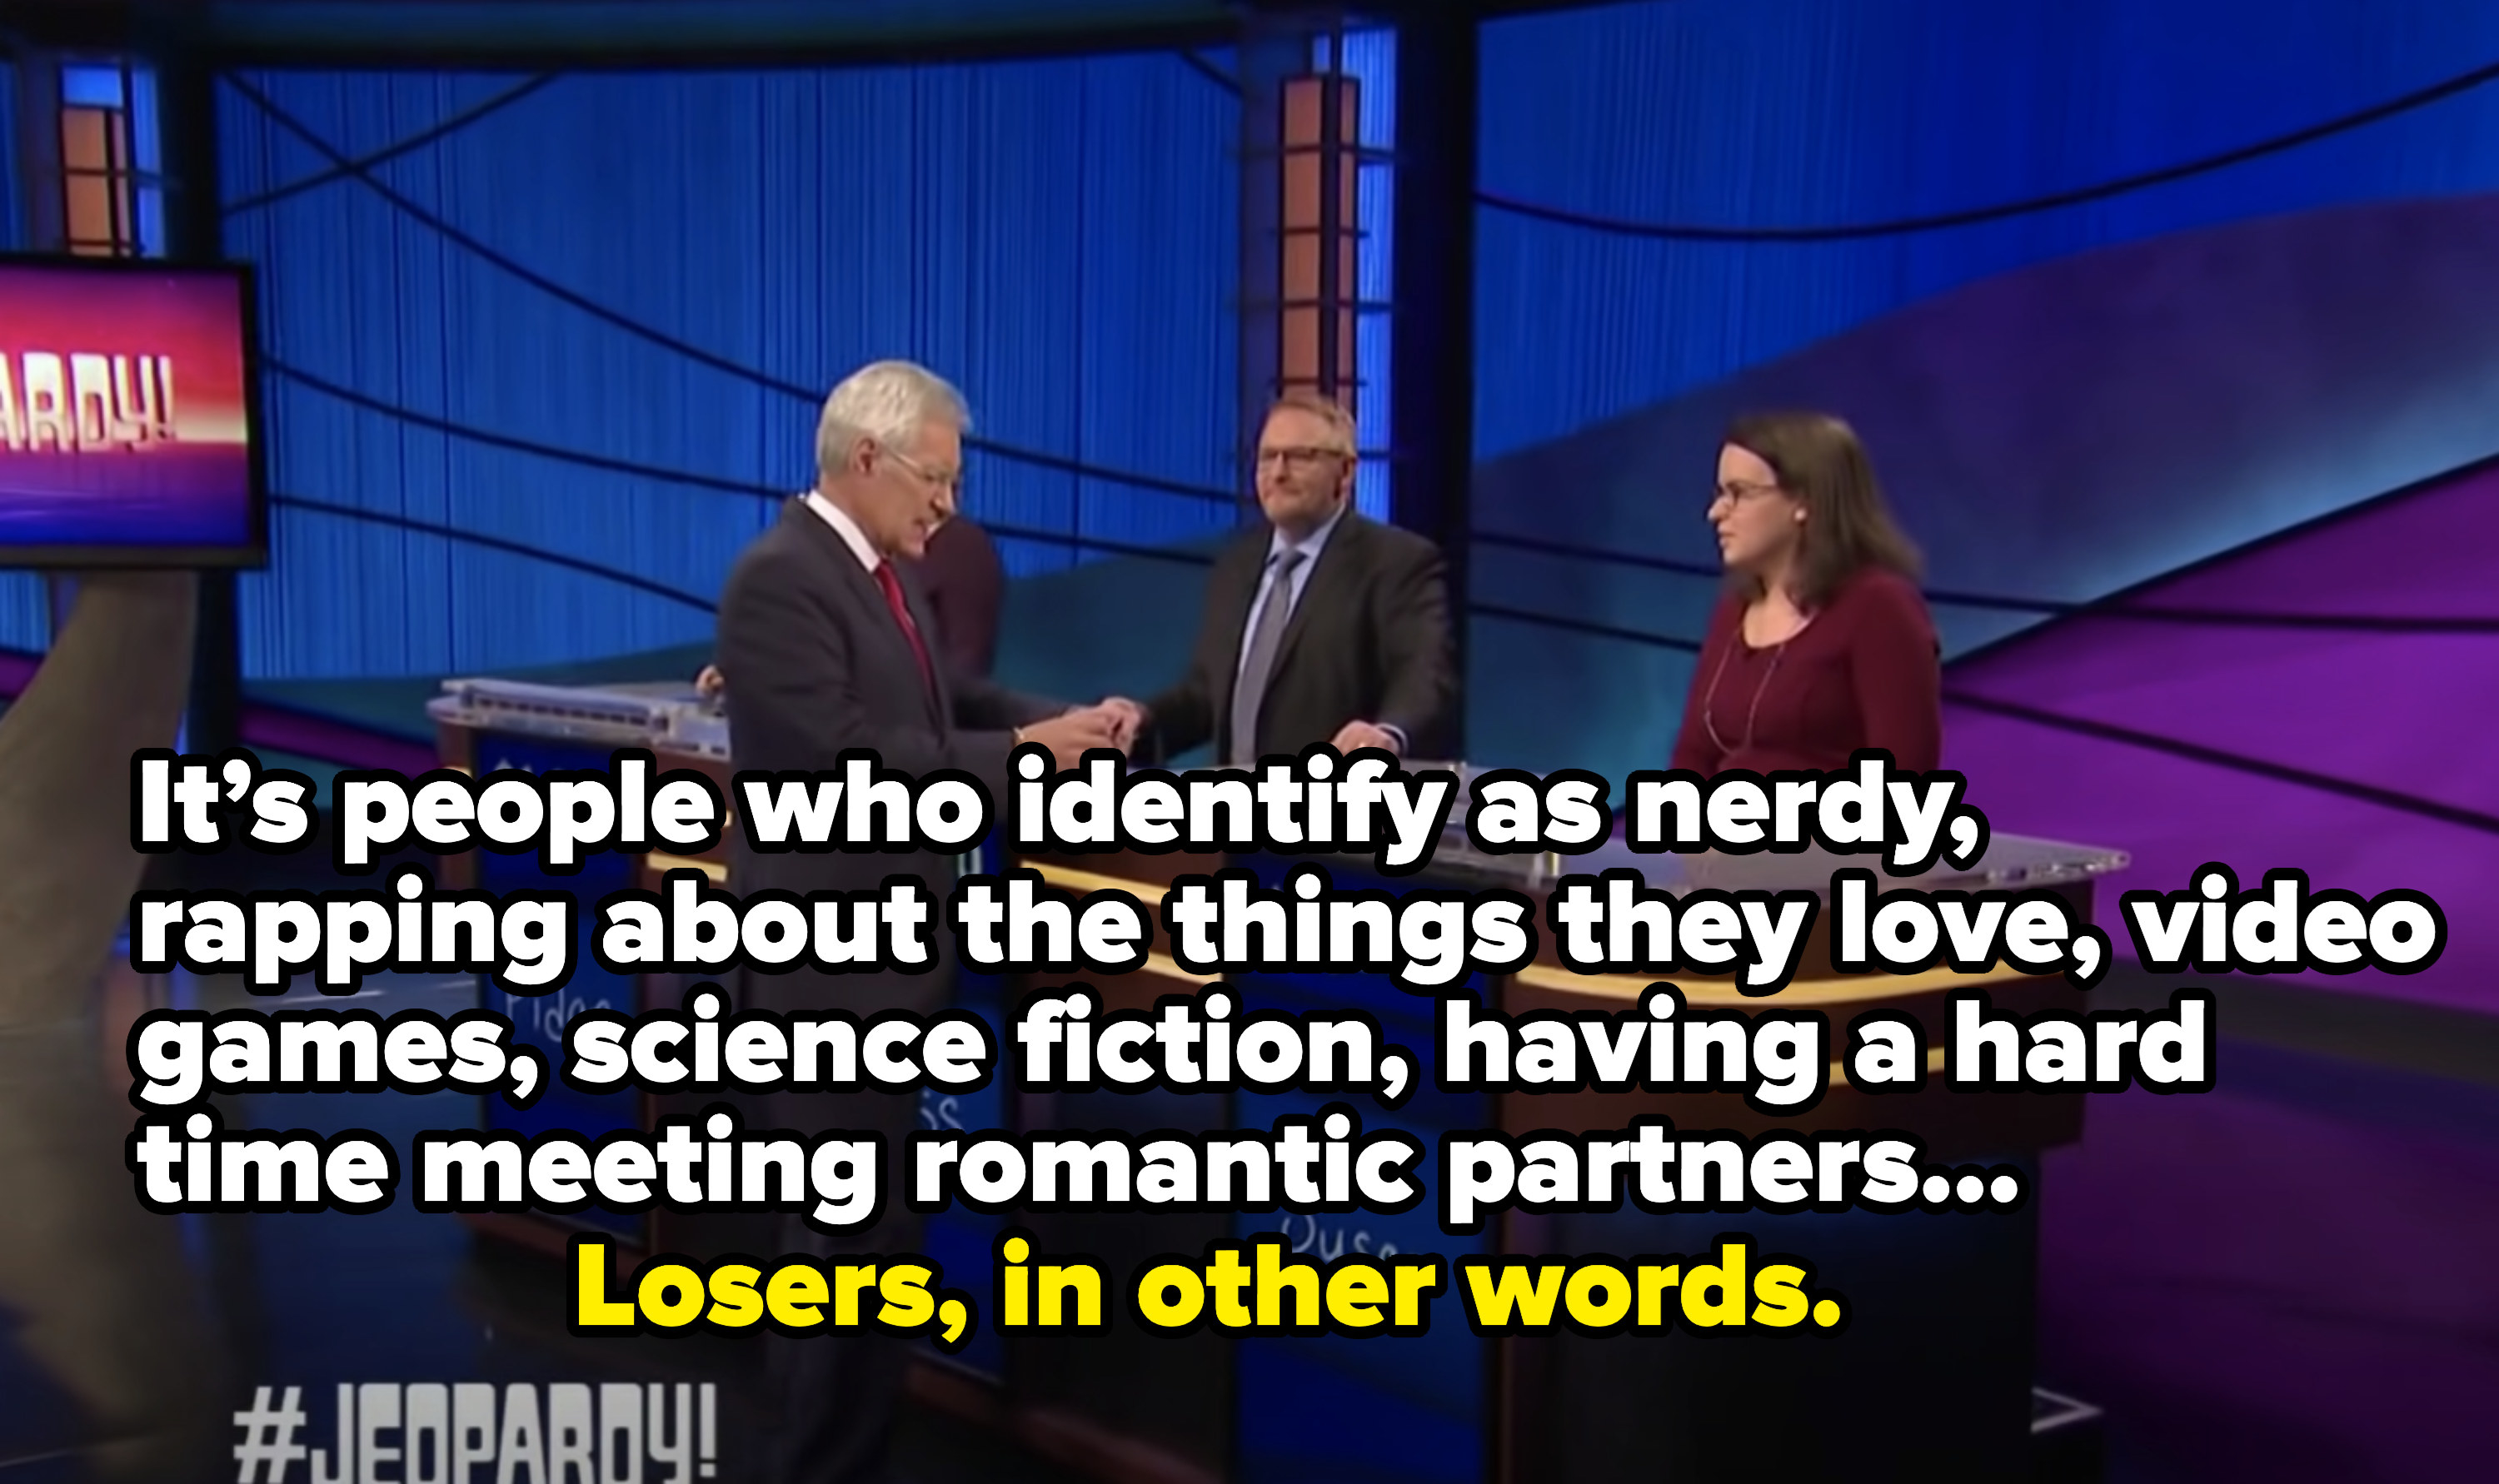 Woman saying &quot;It&#x27;s people who identify as nerdy, rapping about the things they love, video games, sci-fi, having a hard time meeting romantic partners&quot; and Alex says, &quot;Losers, in other words&quot;